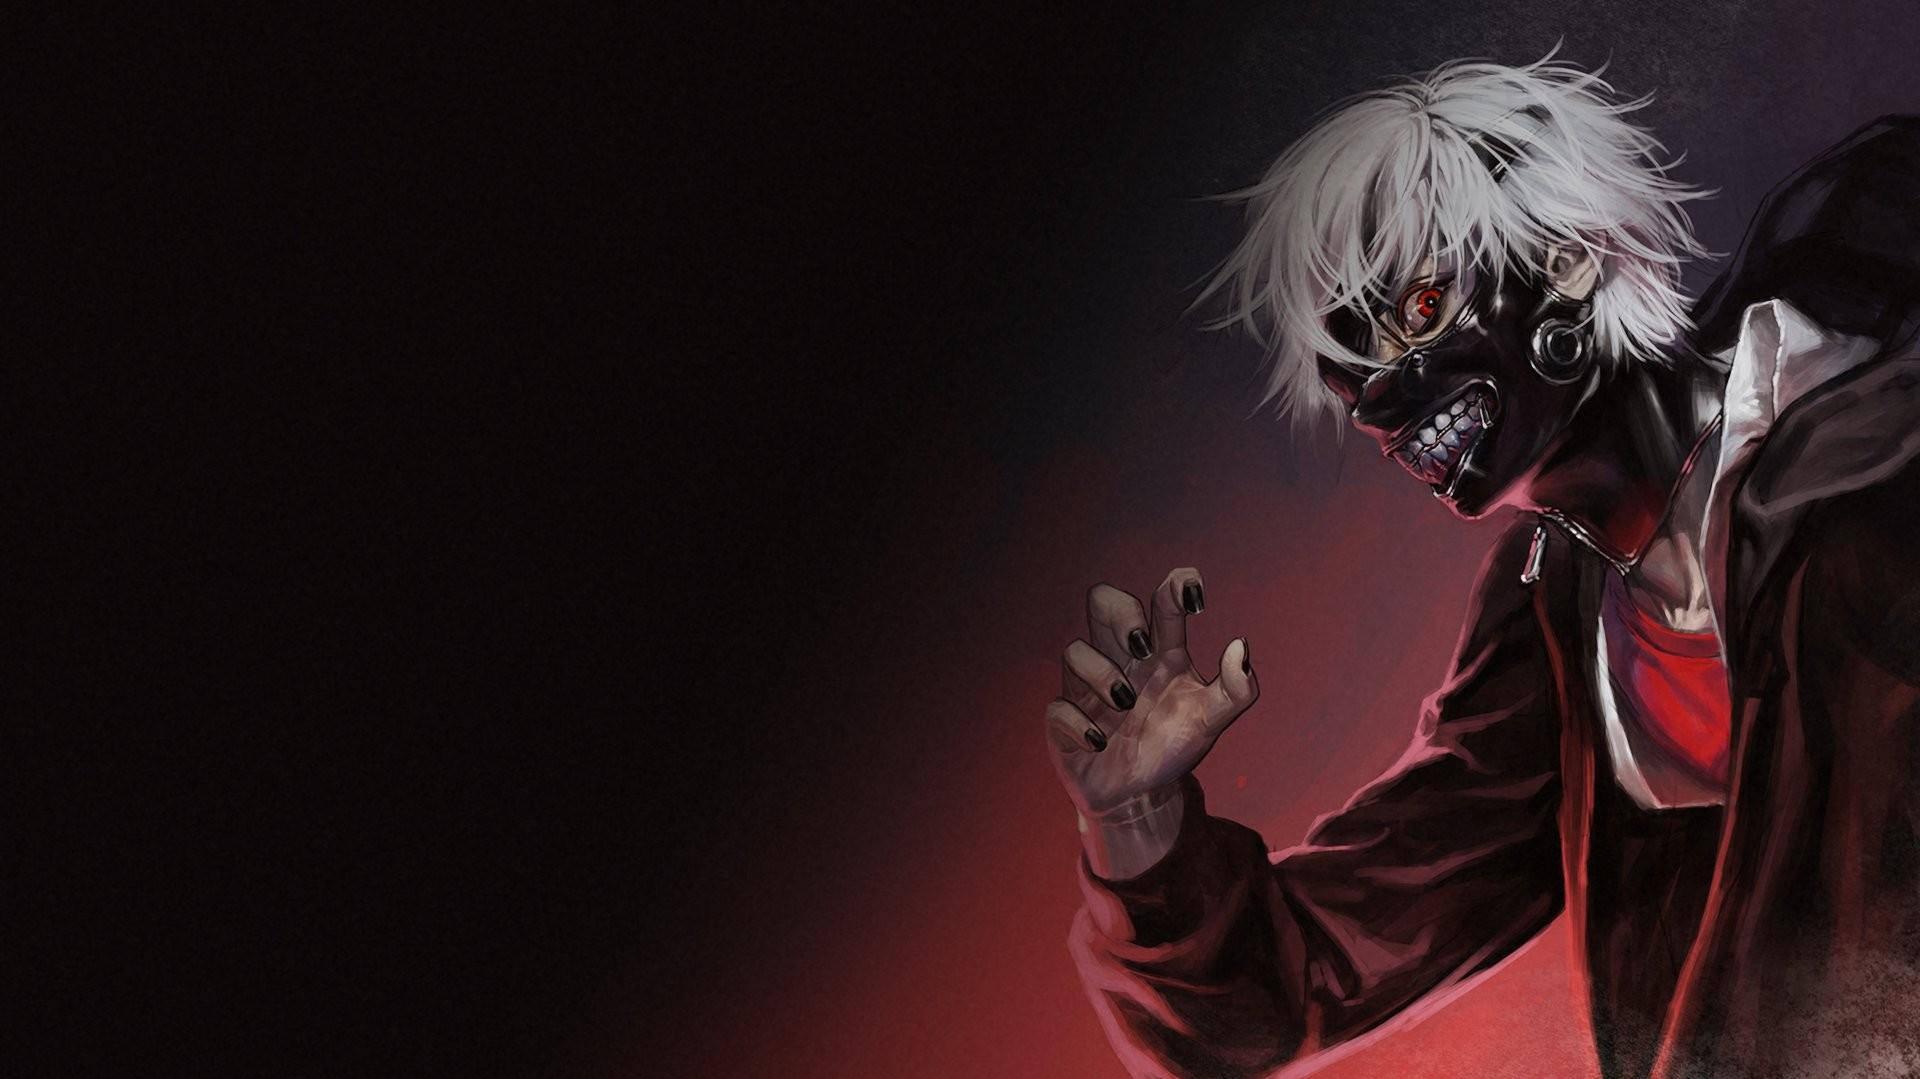  Scary Anime Boy Wallpapers